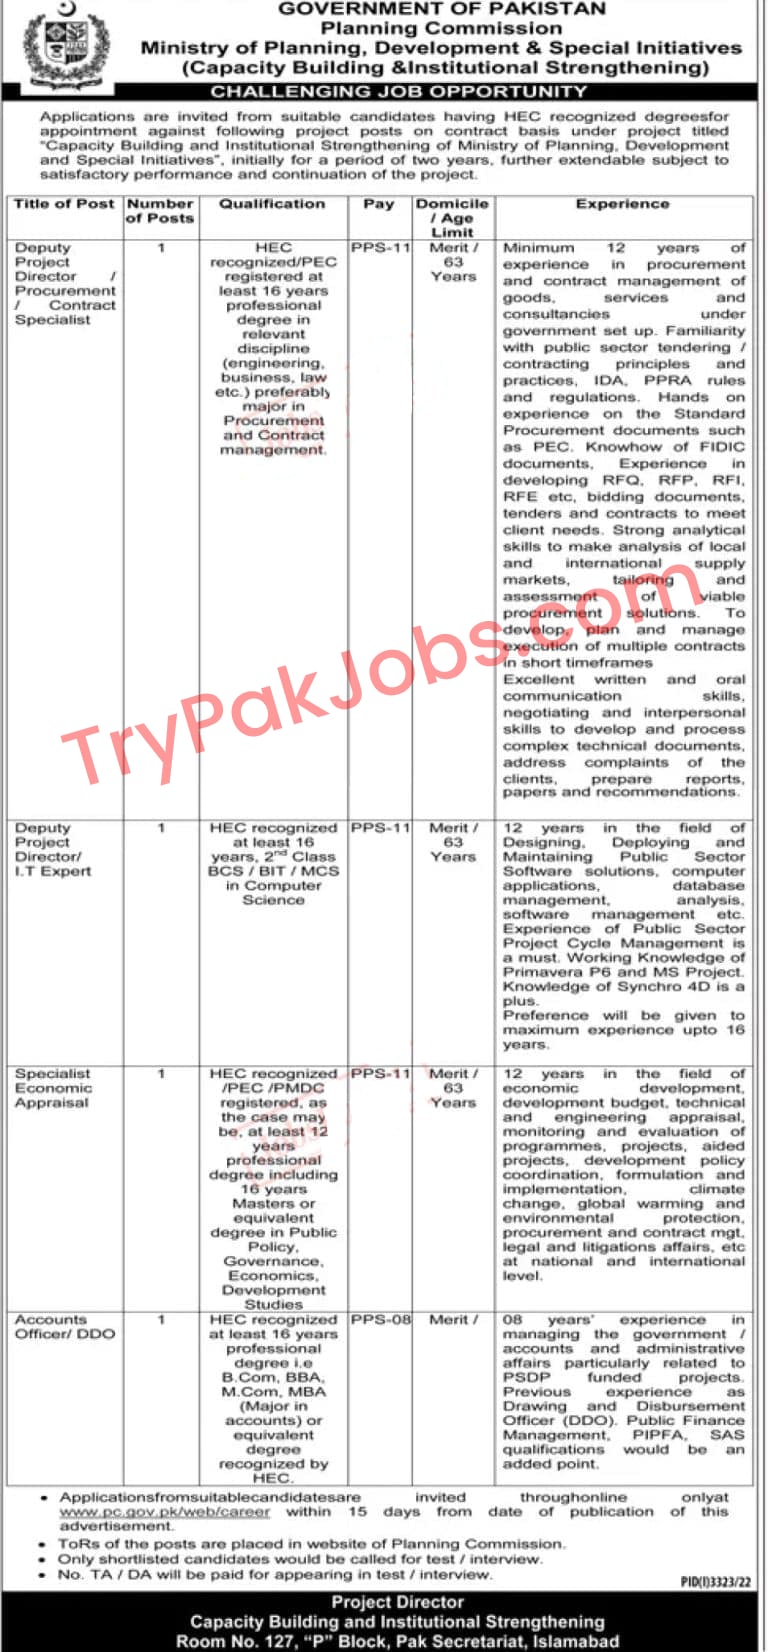 Ministry-of-Planning-and-Development-Jobs-2022-in-Planning-Commission-Latest-768x1652 (2)